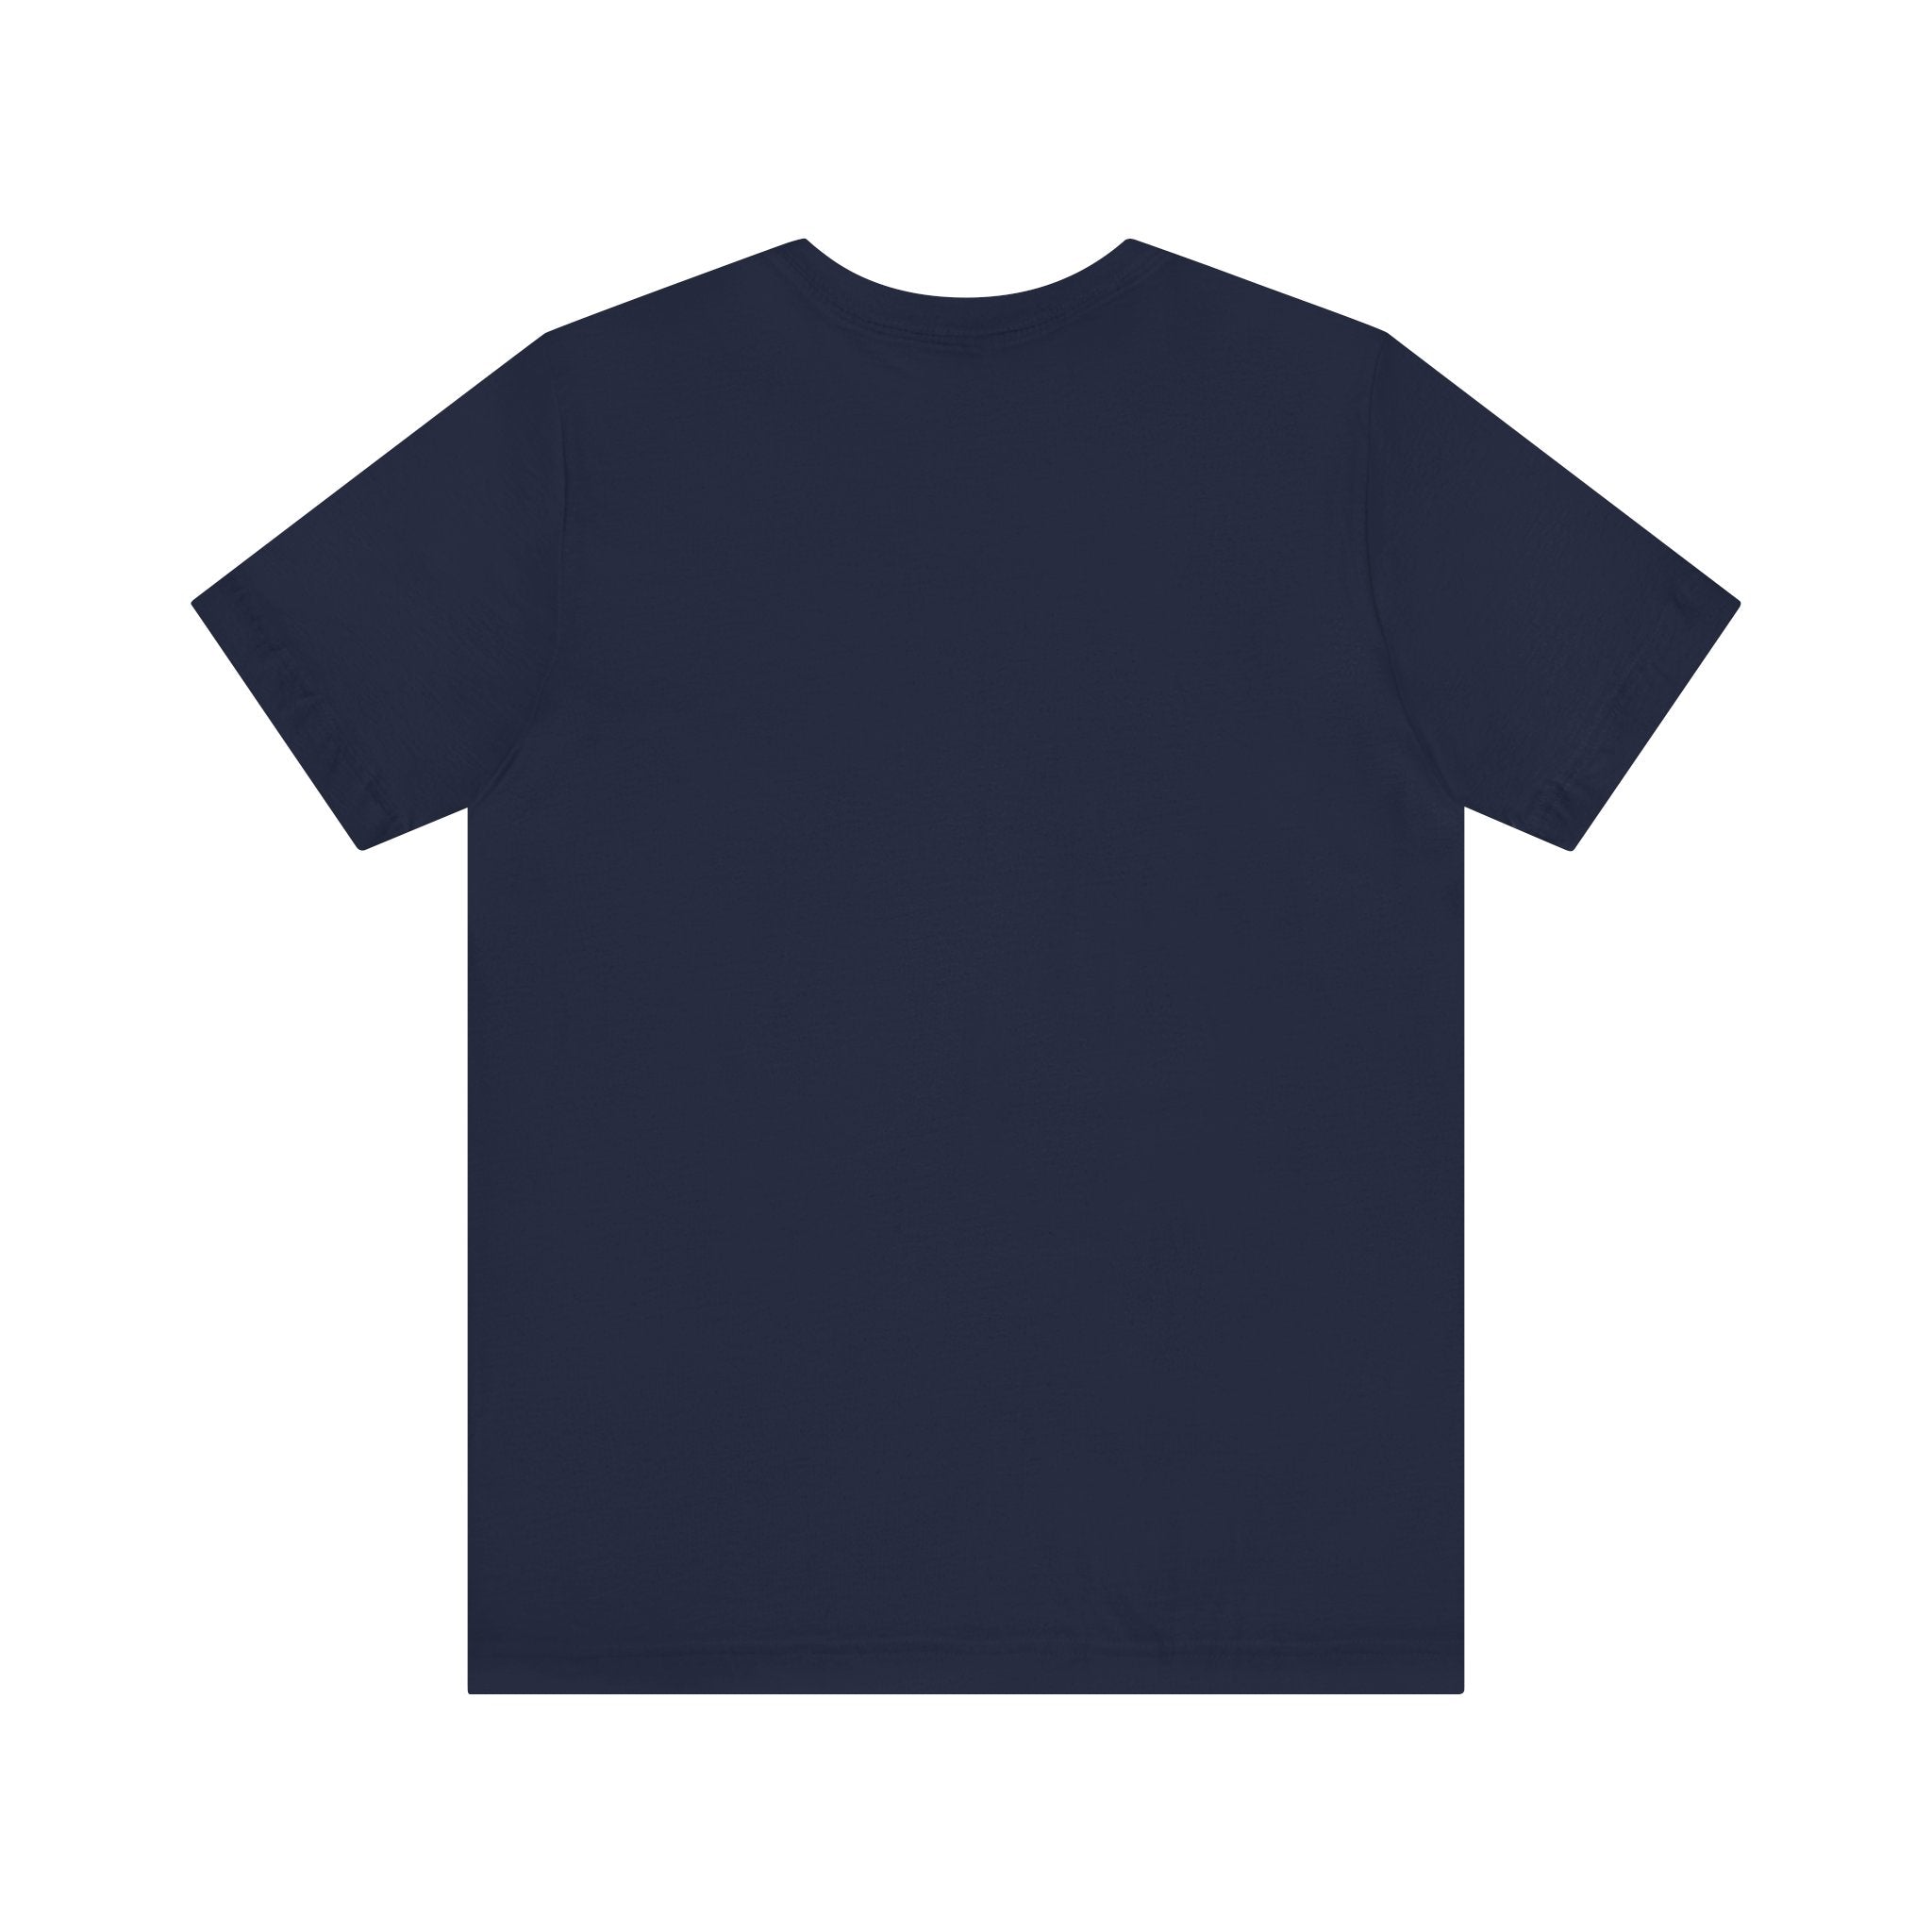 A plain navy blue short-sleeve Binary Rain Cloud - T-Shirt, made from luxurious Airlume combed cotton, is displayed against a white background. The shirt is shown from the back.